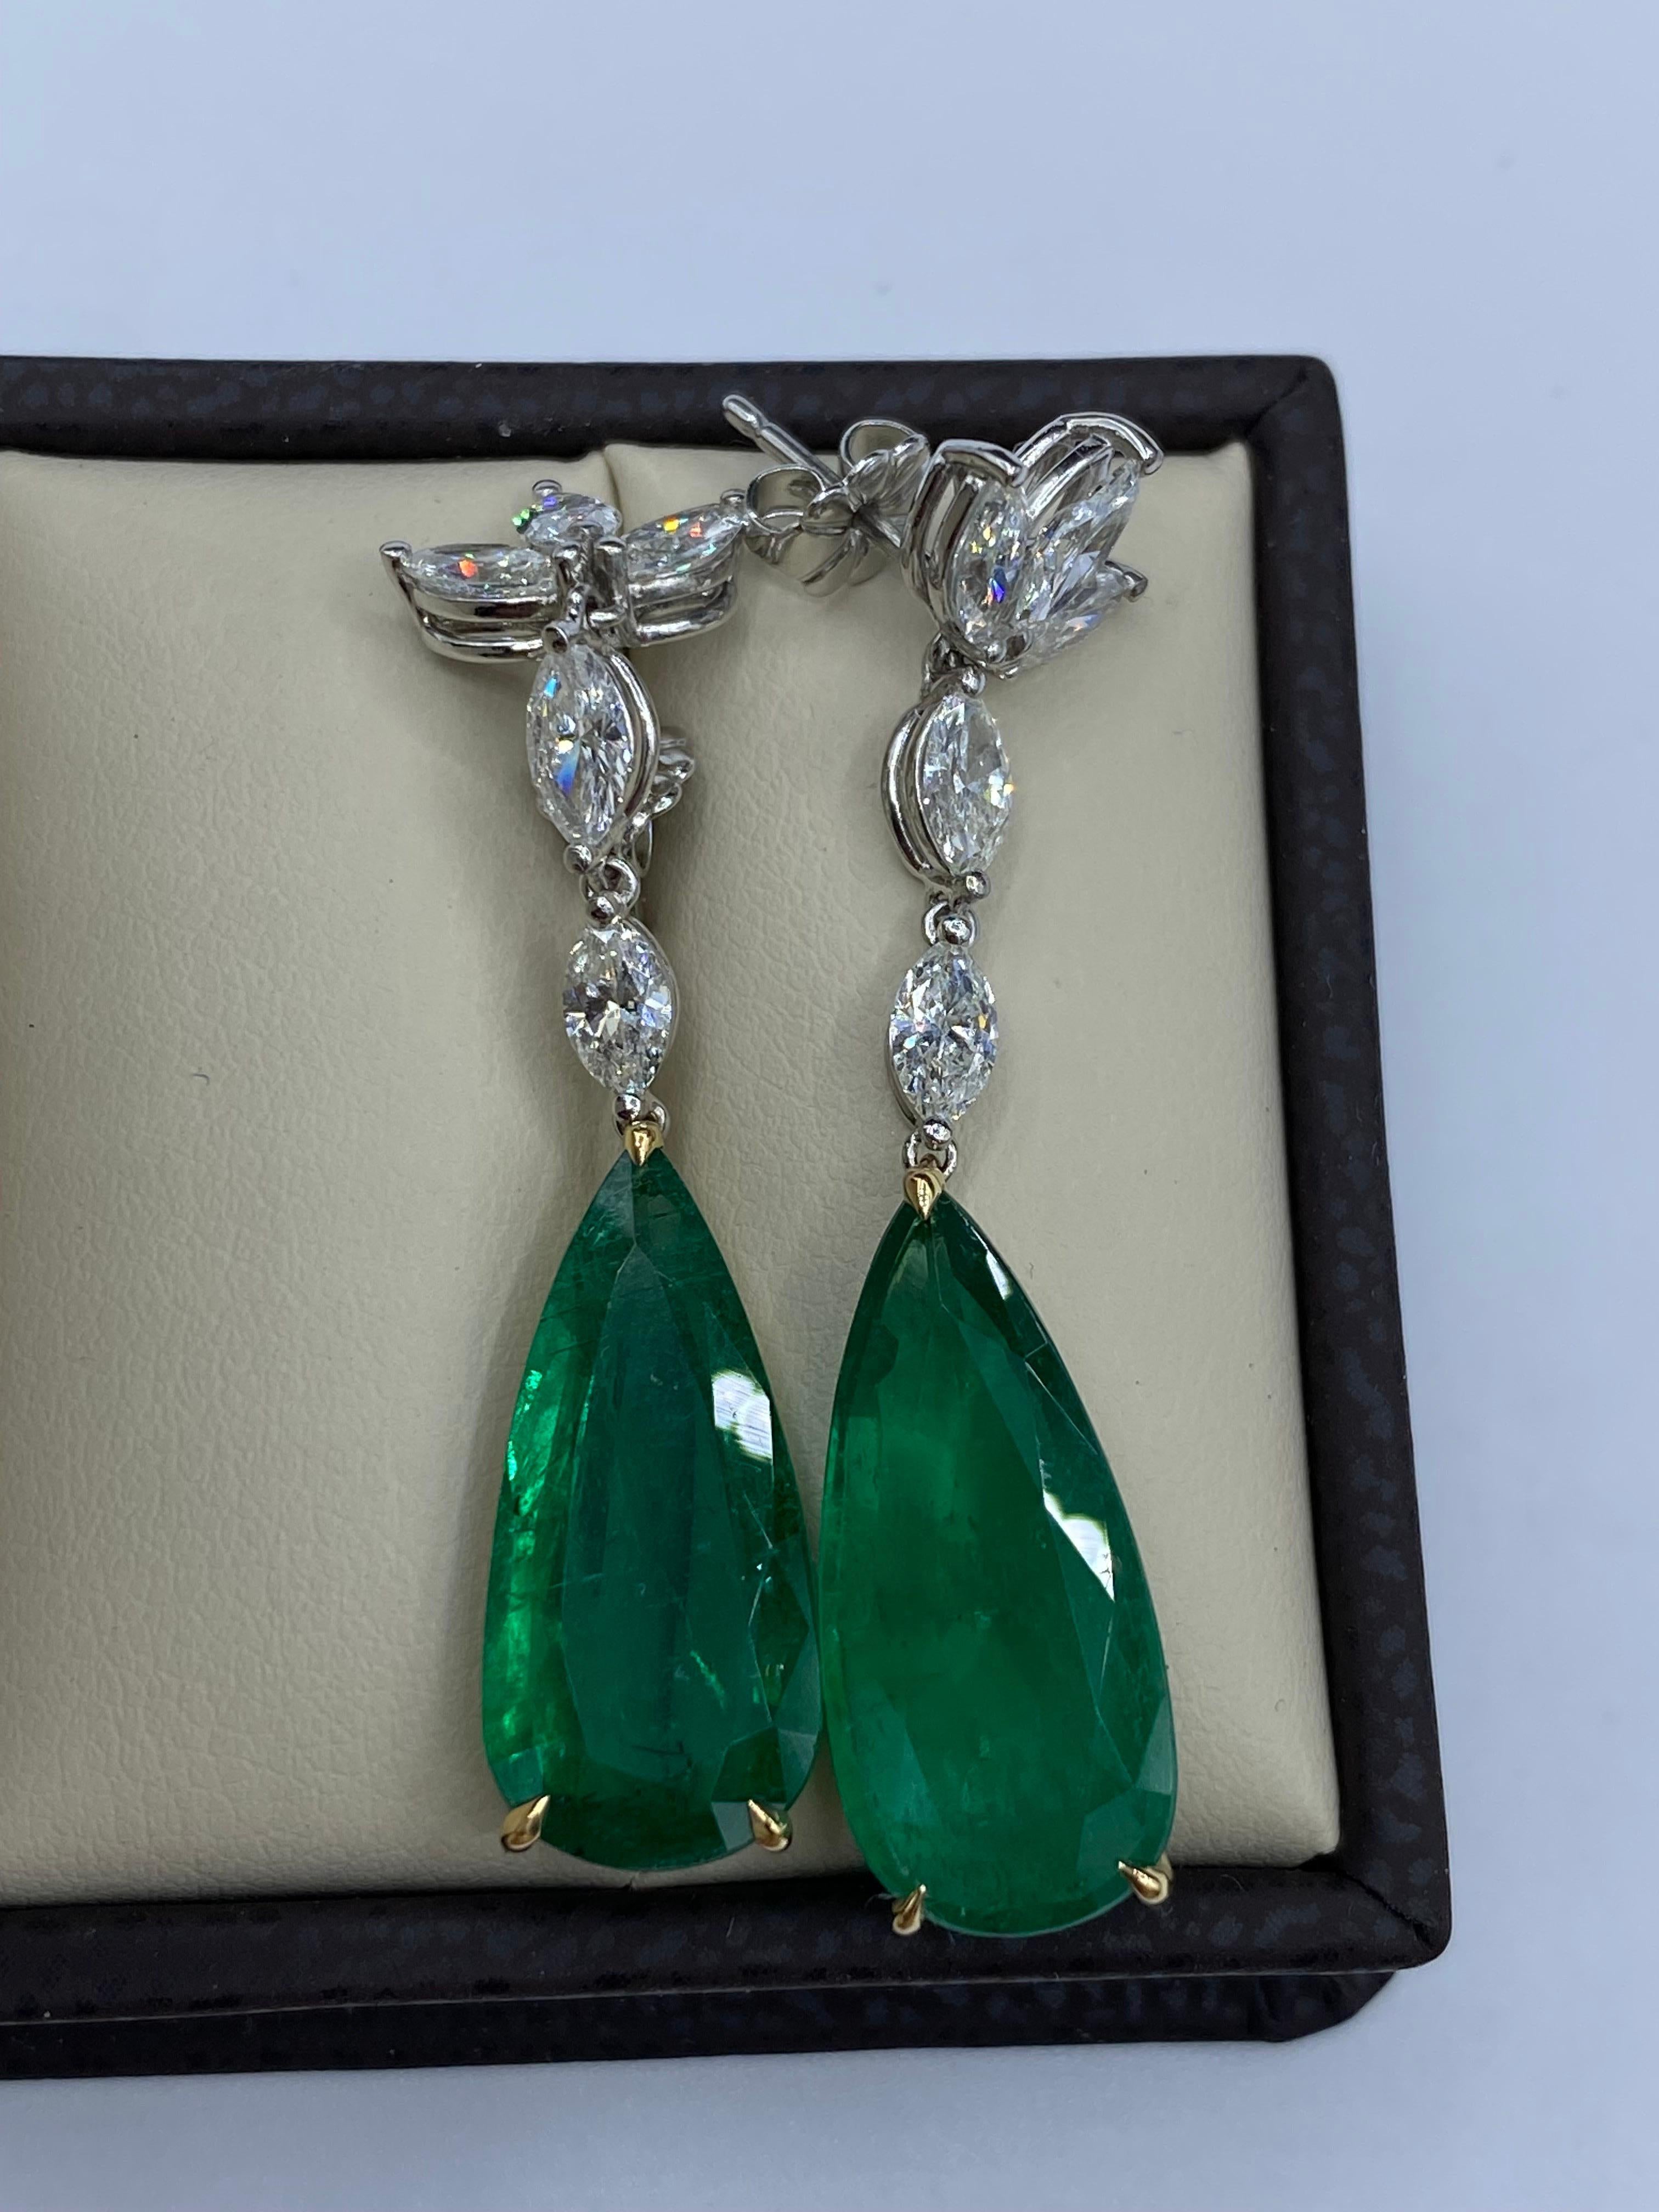 From Emilio Jewelry, a well known and respected wholesaler/dealer located on New York’s iconic Fifth Avenue, 
2 gorgeous teardrop emeralds totaling 12.98 carats, are the focal point of this earring. The emeralds are not heavy at all, and give a